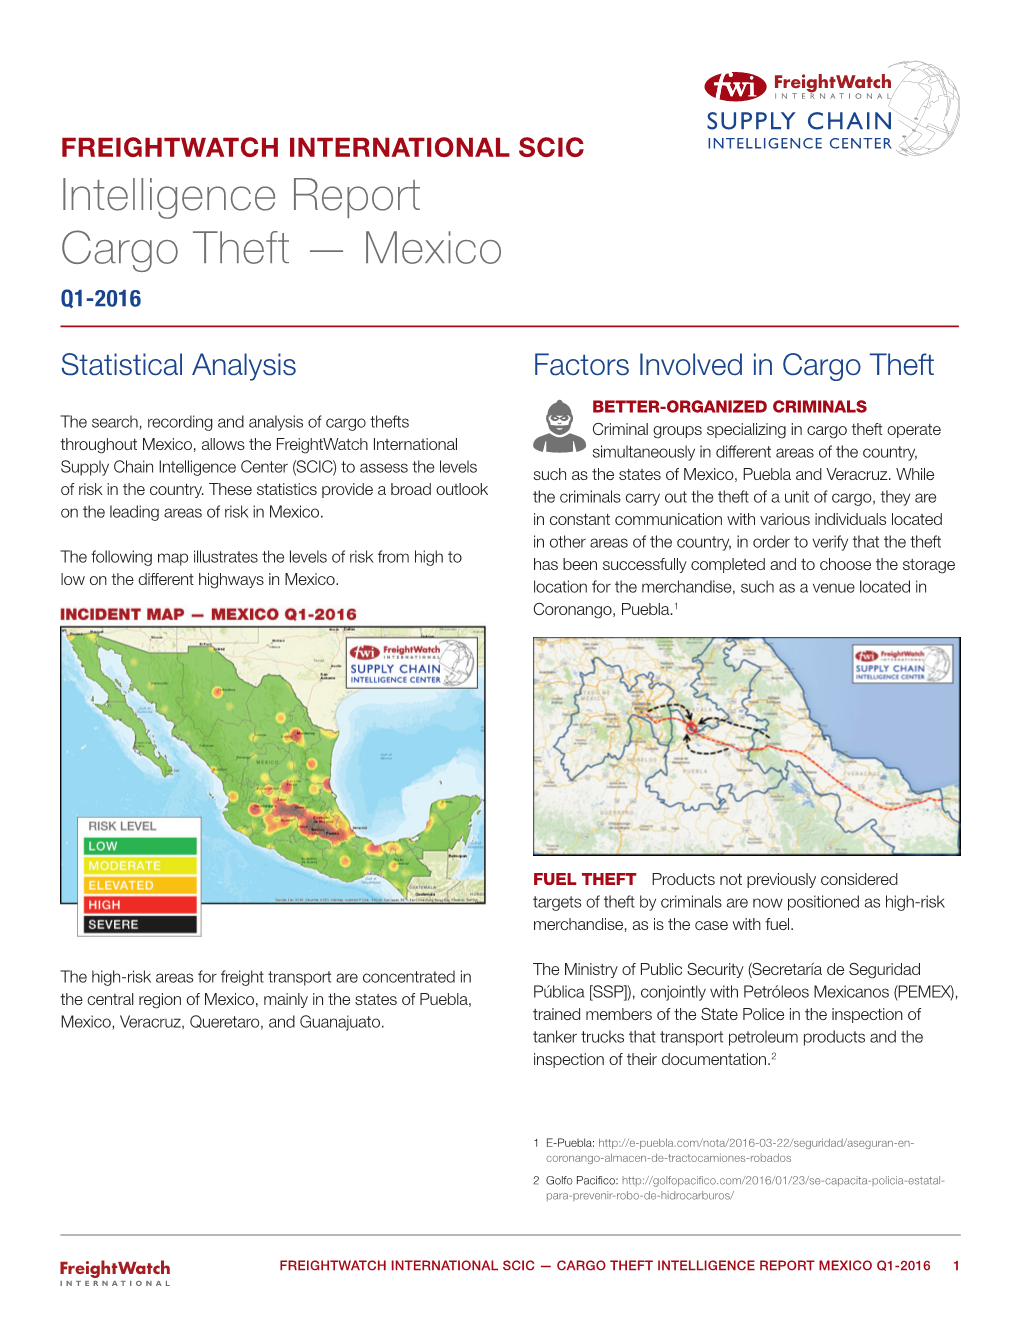 Intelligence Report Cargo Theft — Mexico Q1-2016